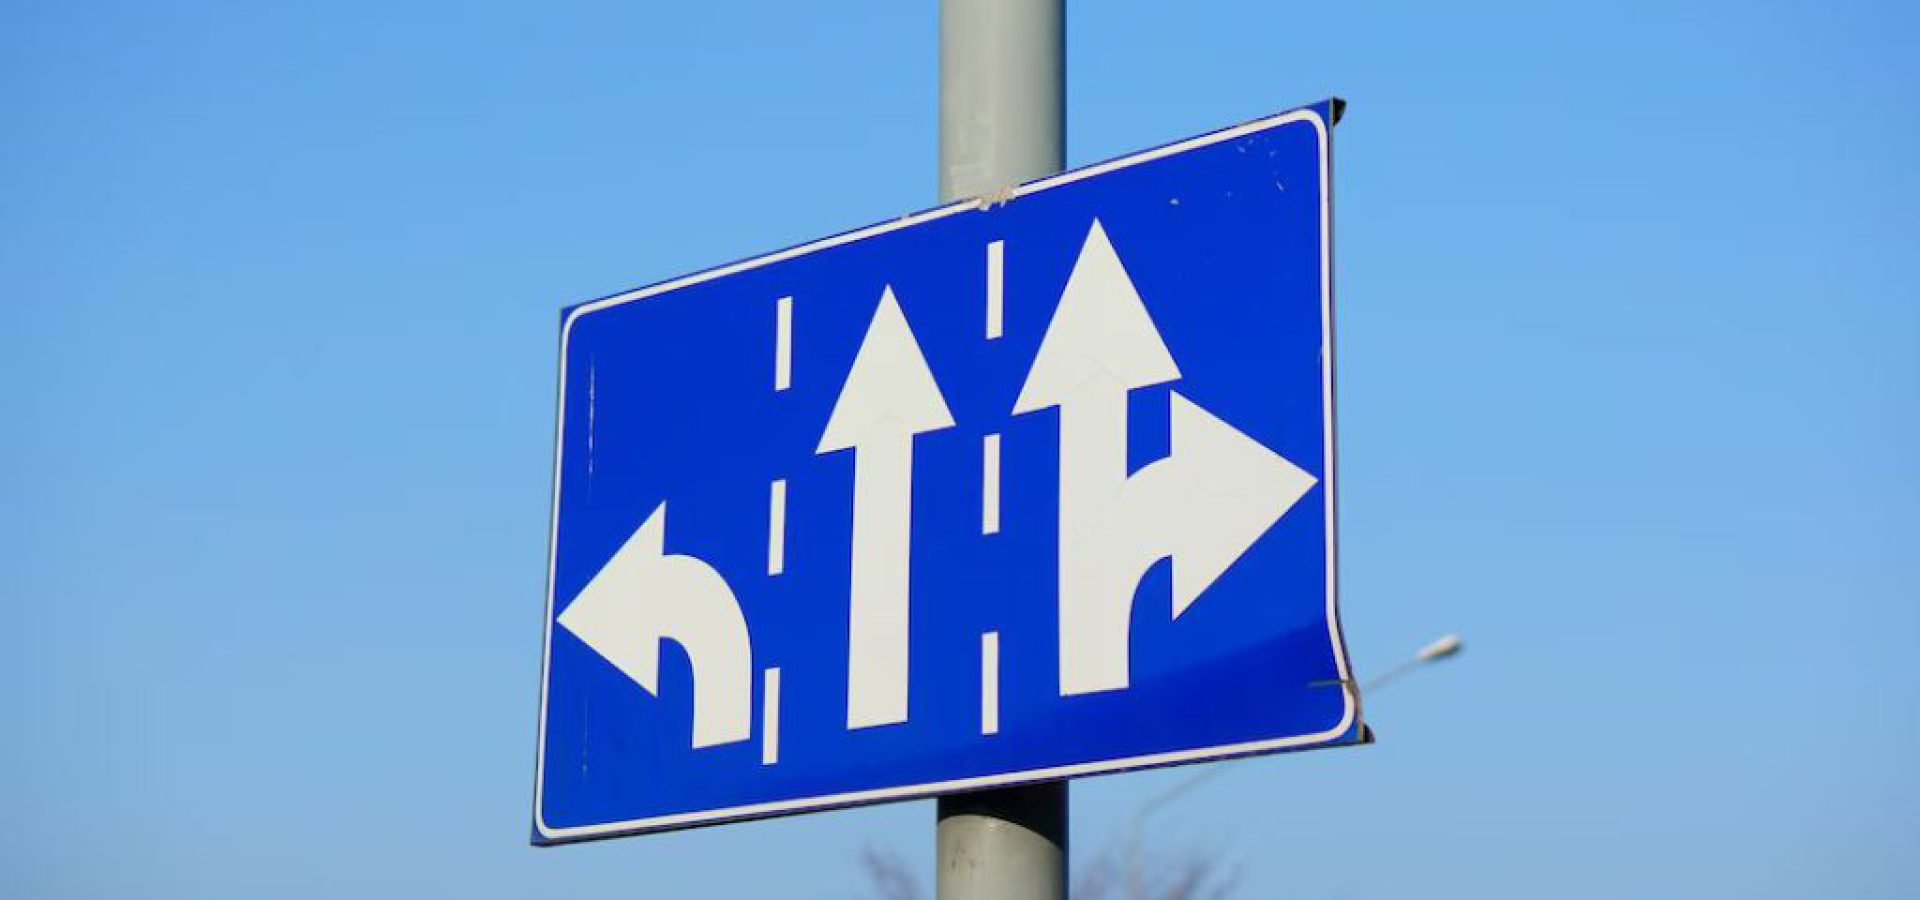 low-angle-shot-blue-directions-sign-with-white-arrows_181624-20064-1024x679